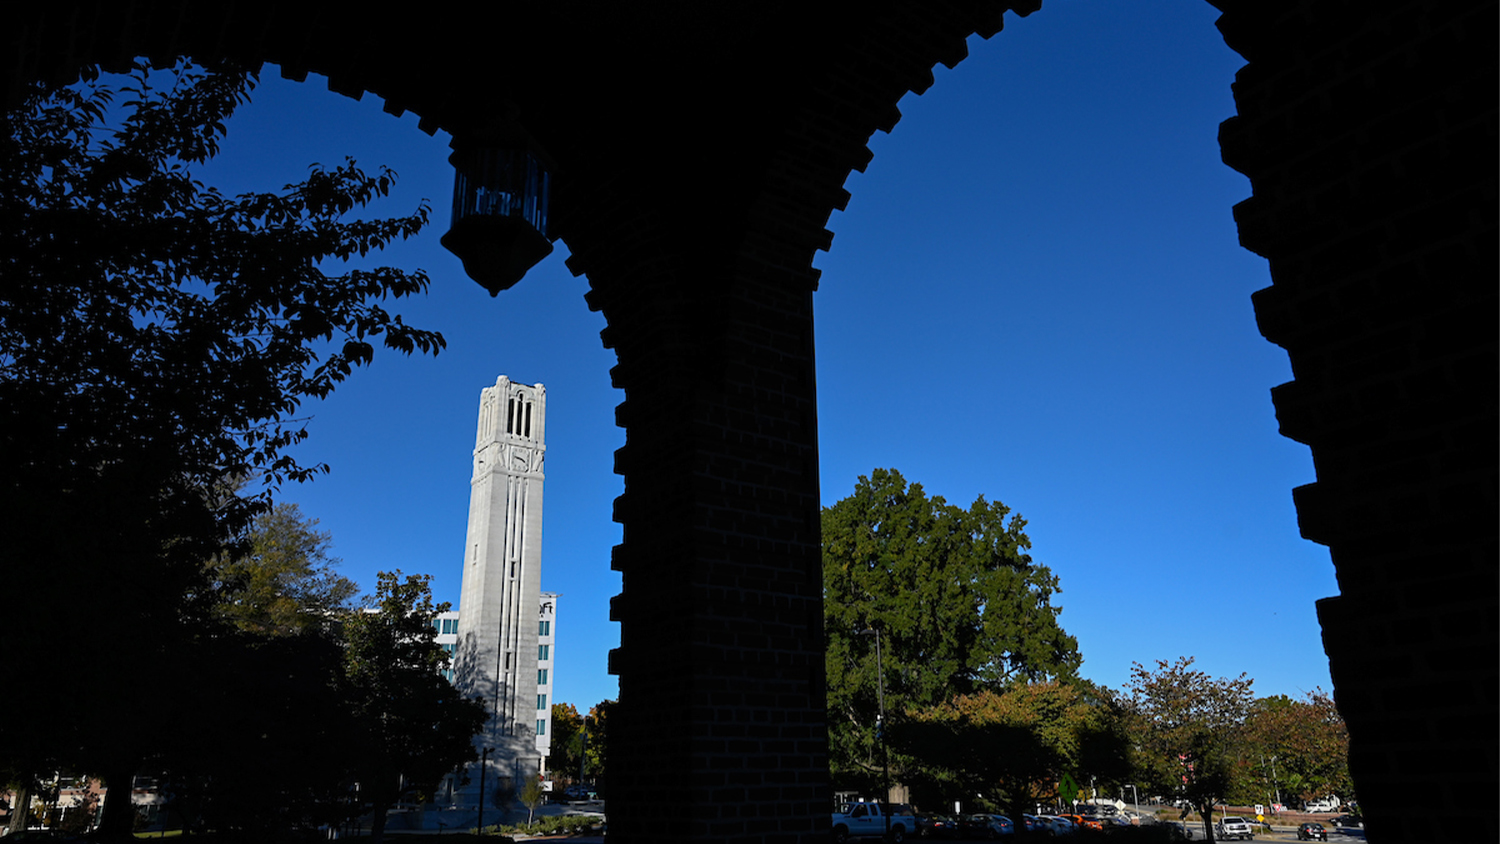 Looking towards the Memorial Bell Tower from under the front awning of Holladay Hall